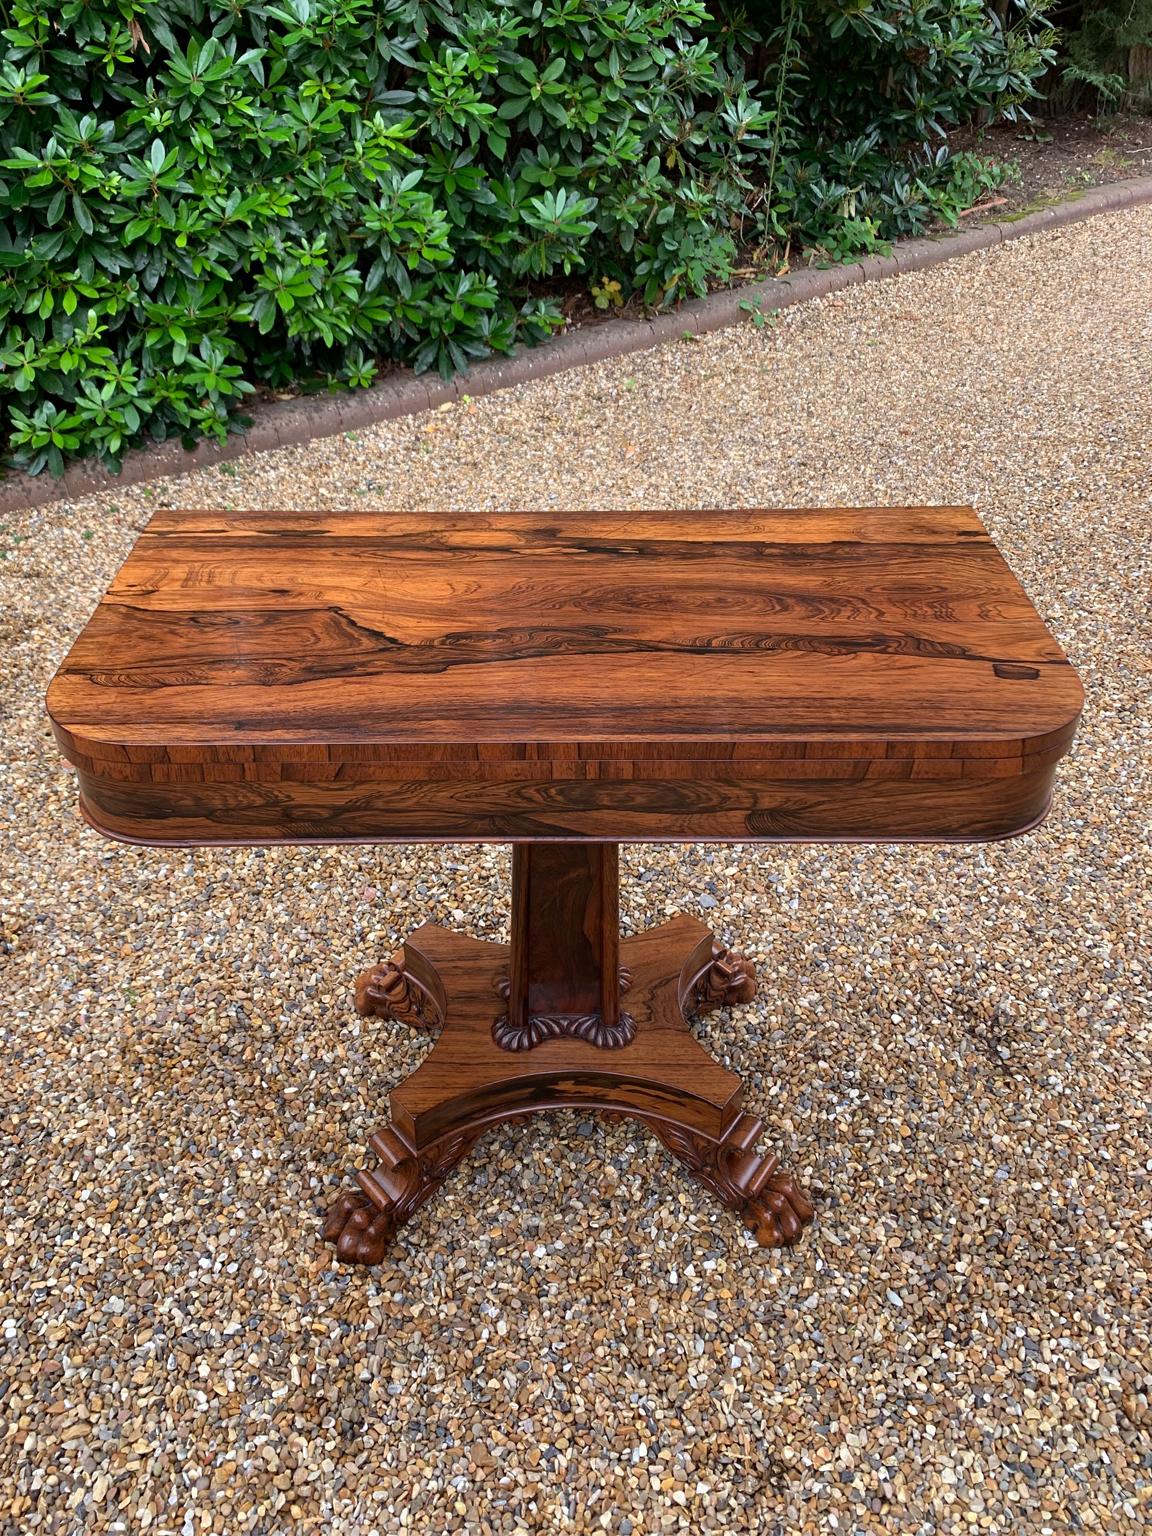 A beautiful 19th Century figured Regency Rosewood Tea Table. The top rotates by 90 degrees and unfolds to convert to a Tea Table. The table stands on an elegant solid rosewood turned carved column on a quatrefoil base with four carved lion claw feet